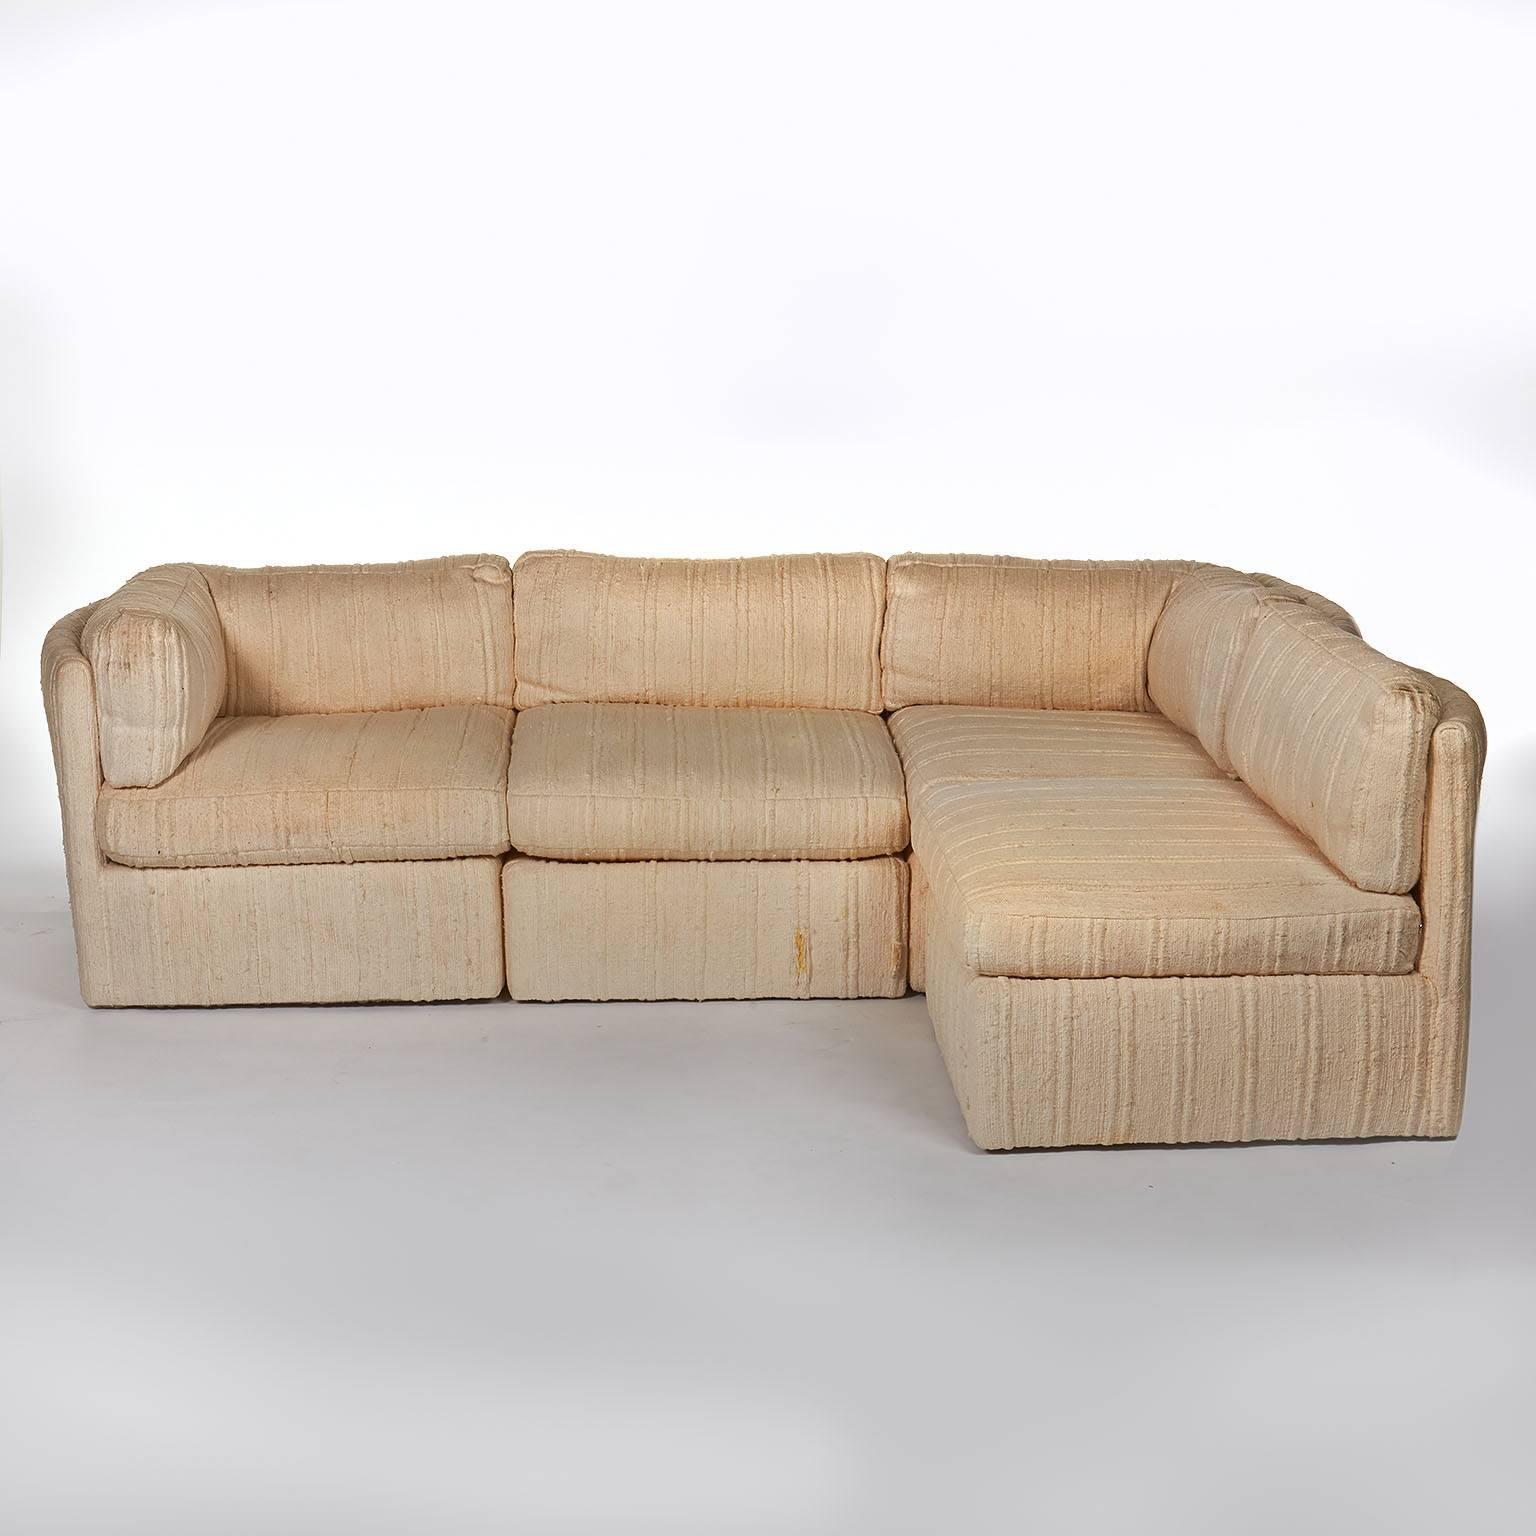 Large 1970s sectional sofa consists of three corner sections and three interior sections. Each section has a curved back and, as a result, the sofa reads like individual chairs placed together a striking and unusual design. Structurally sound;